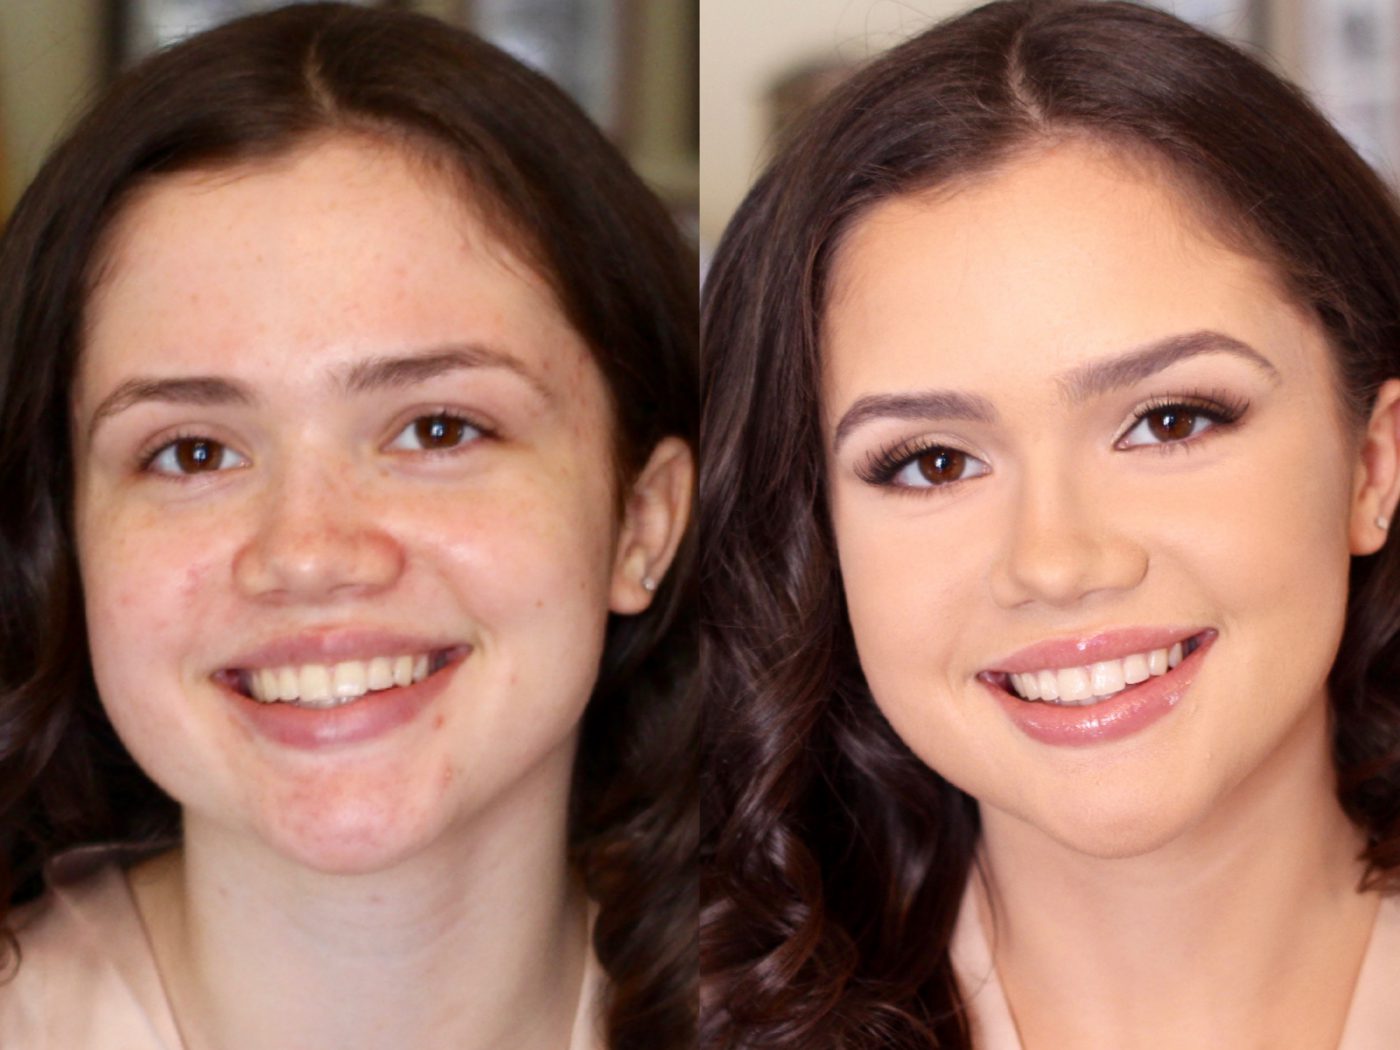 dramatic before and after makeup photos